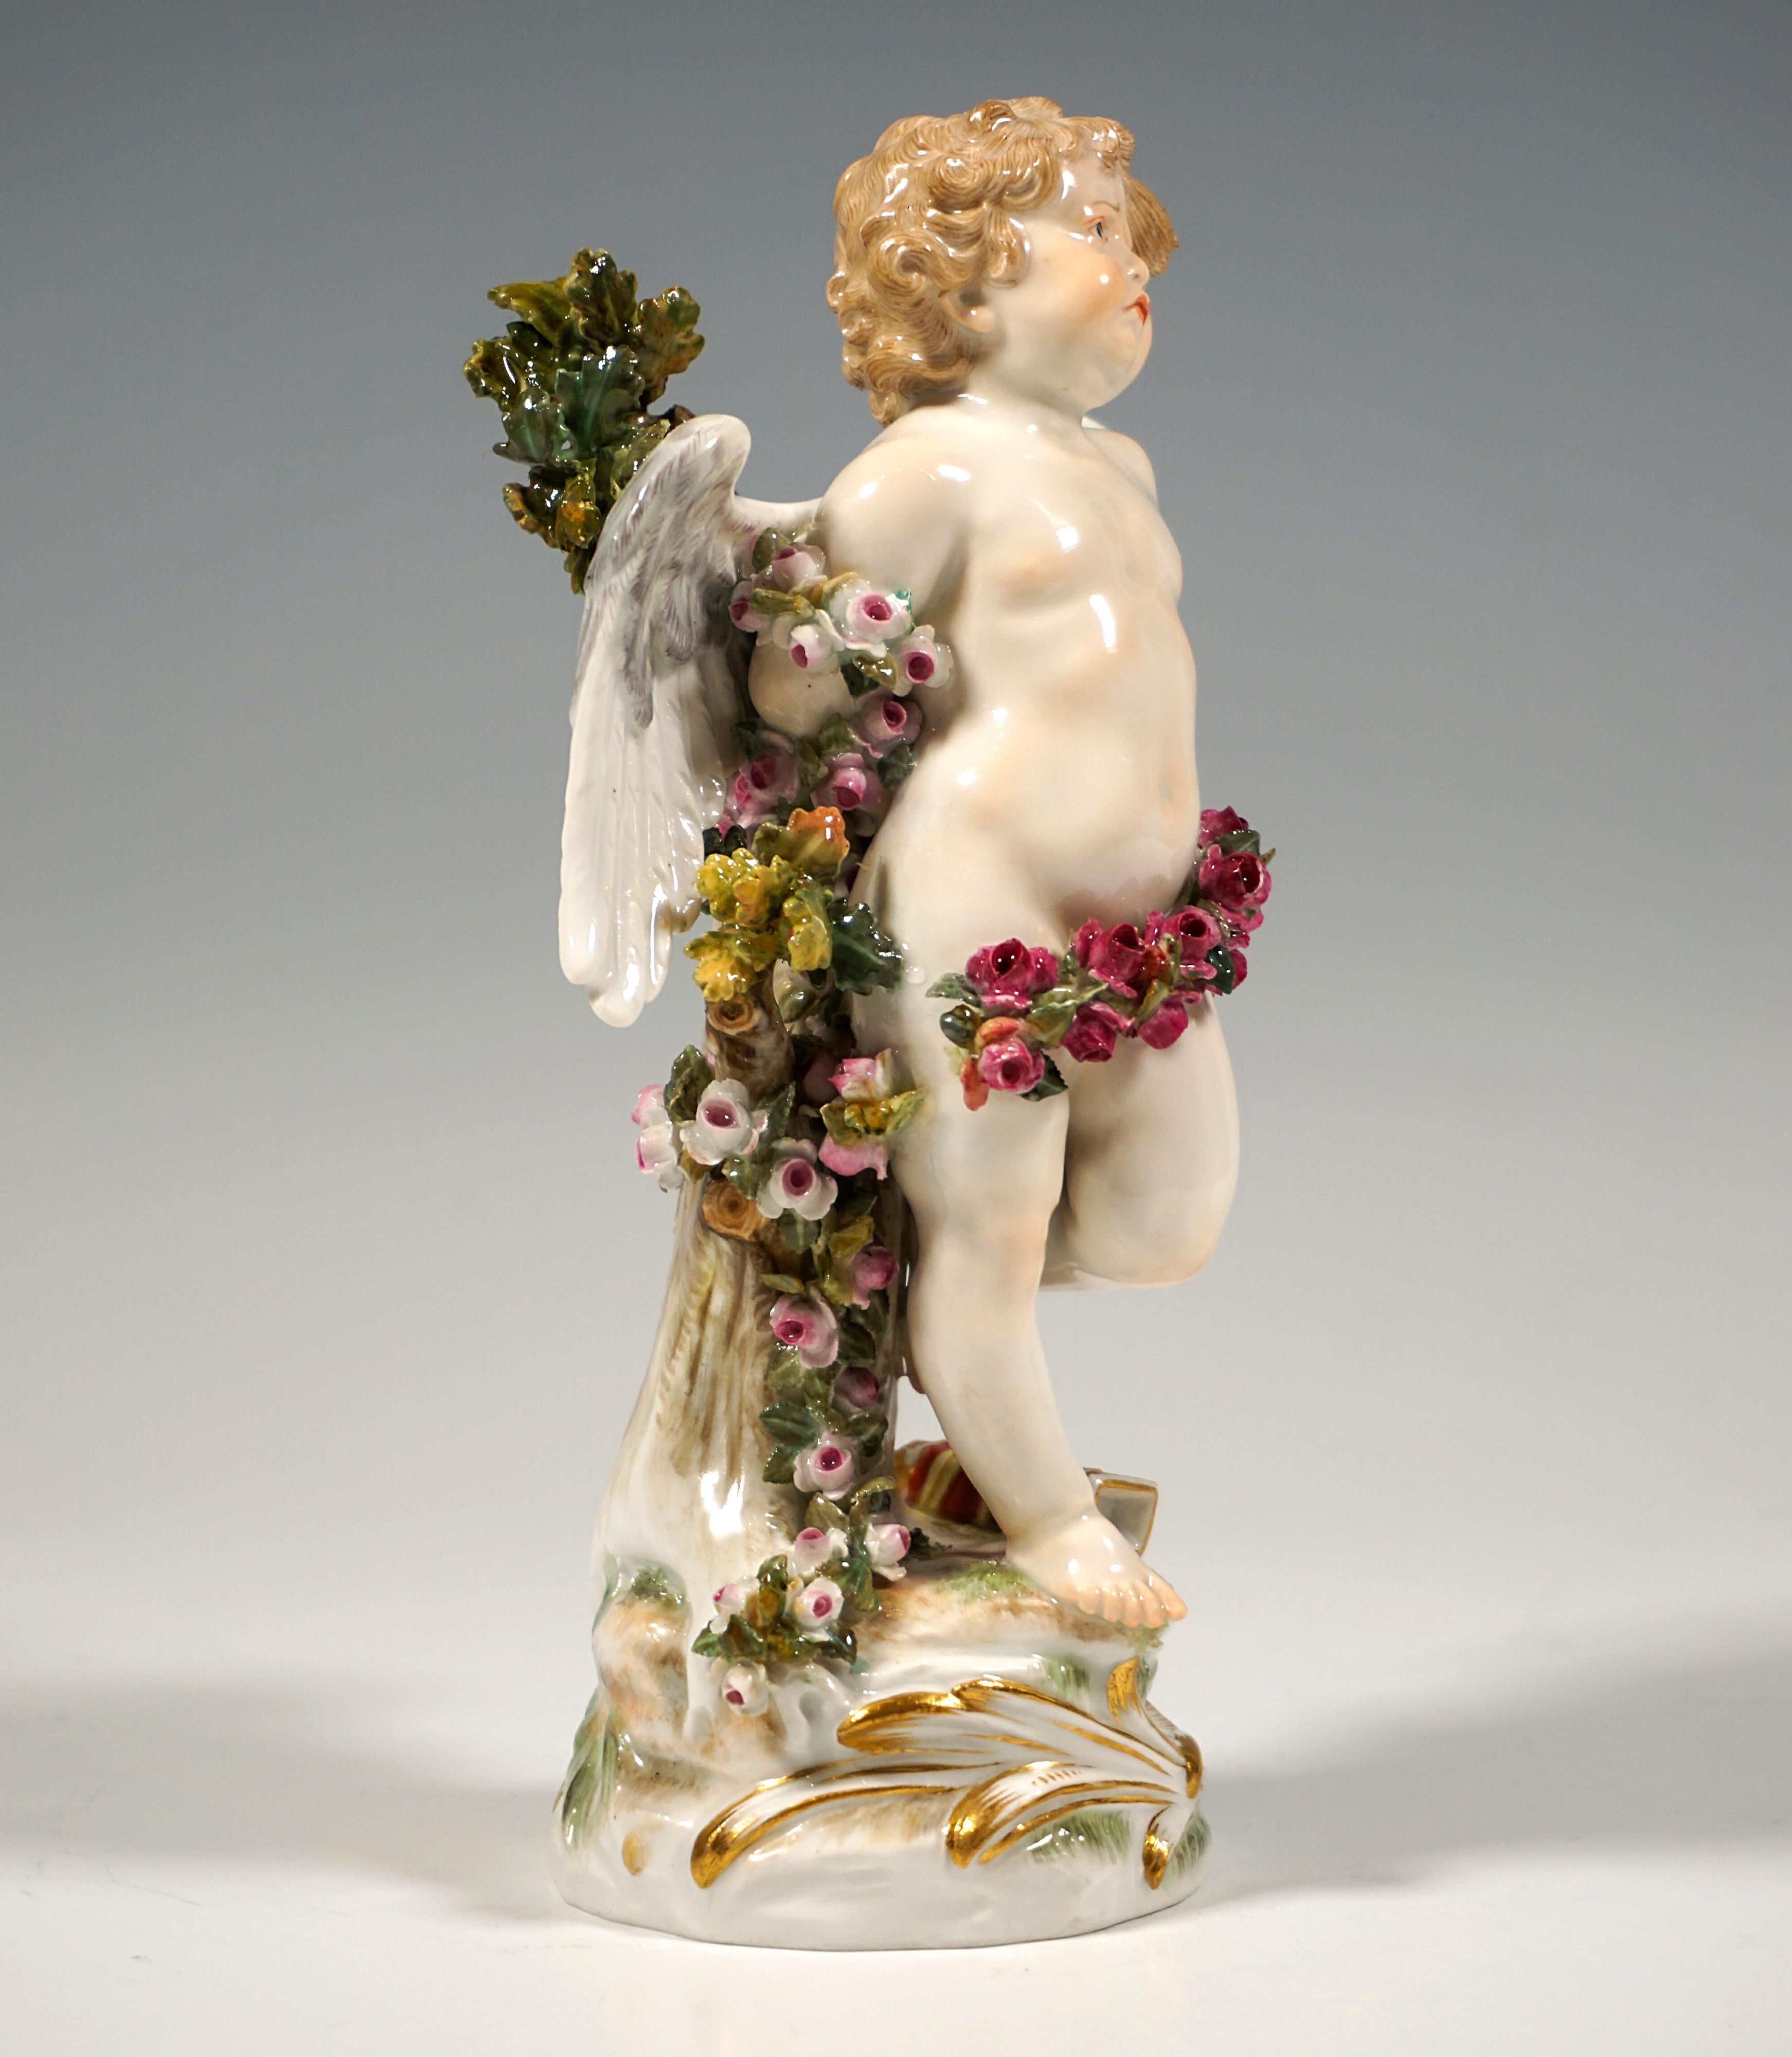 Early 20th Century Meissen Art Nouveau Figure 'Tied Up Cupid' by Paul Helmig, Germany Circa 1900